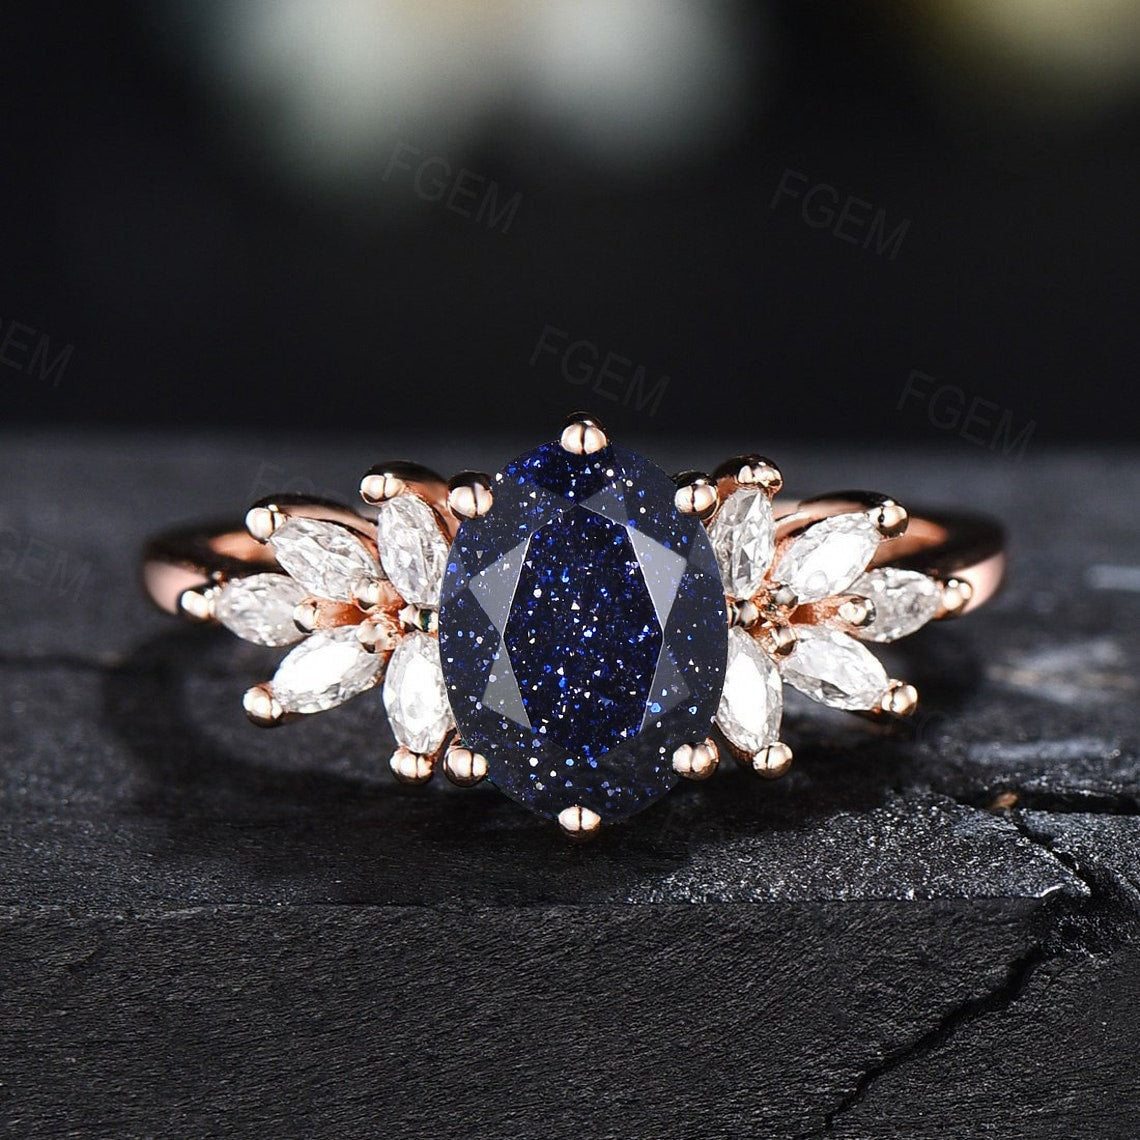 1.5ct Oval Cut Blue Sandstone Ring Oval Cluster Engagement Ring Galaxy Blue Goldstone Ring  Healing Gemstone Jewelry Unique Wedding Gift